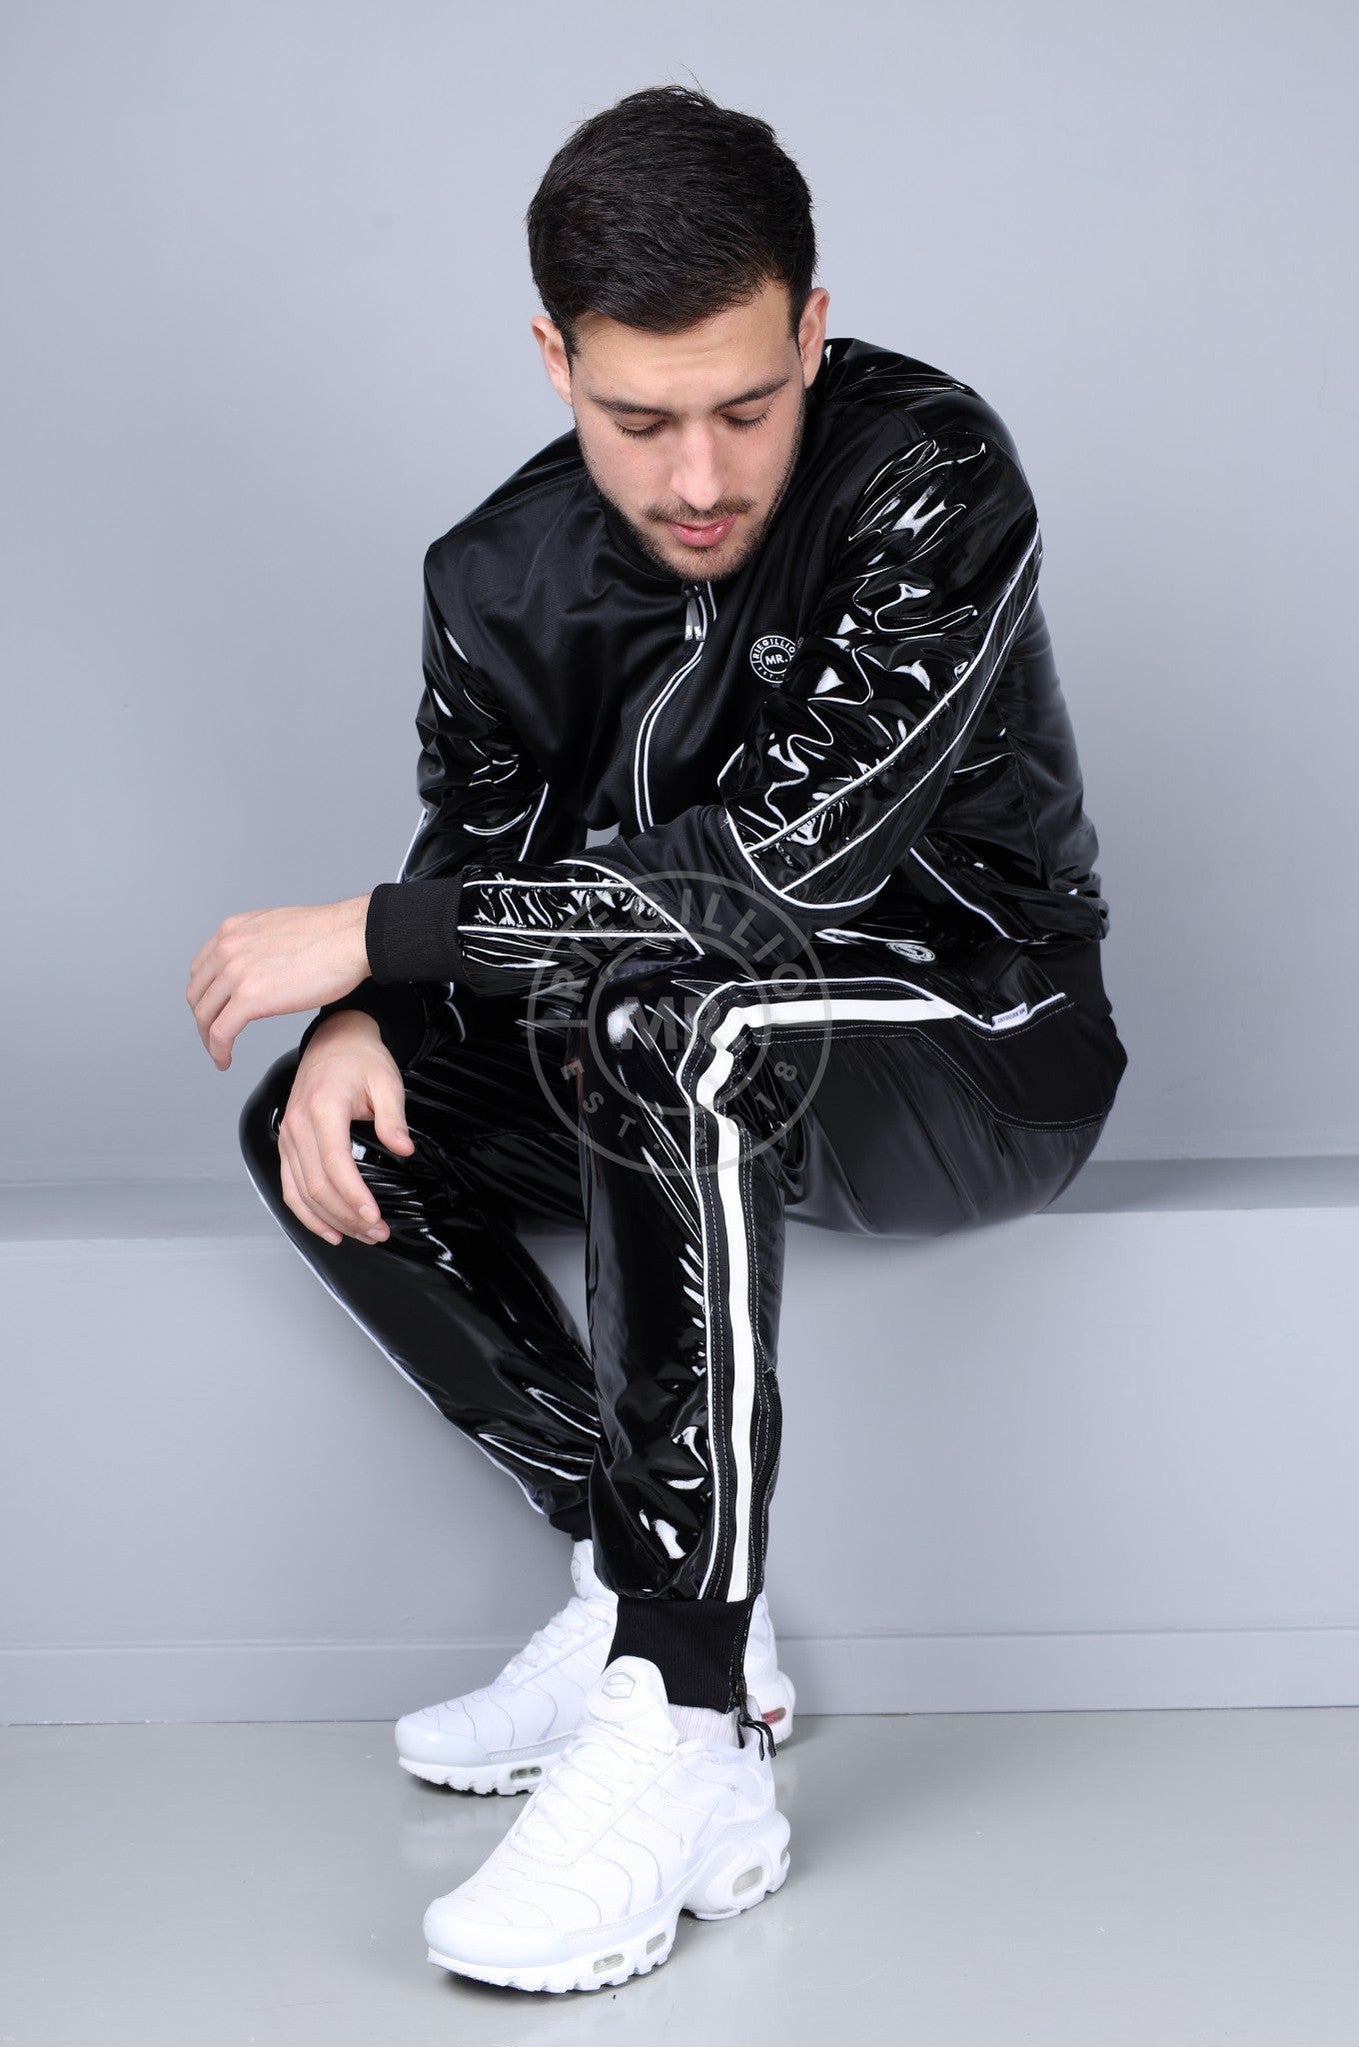 PVC 24 Tracksuit Pants - Black with White Piping at MR. Riegillio